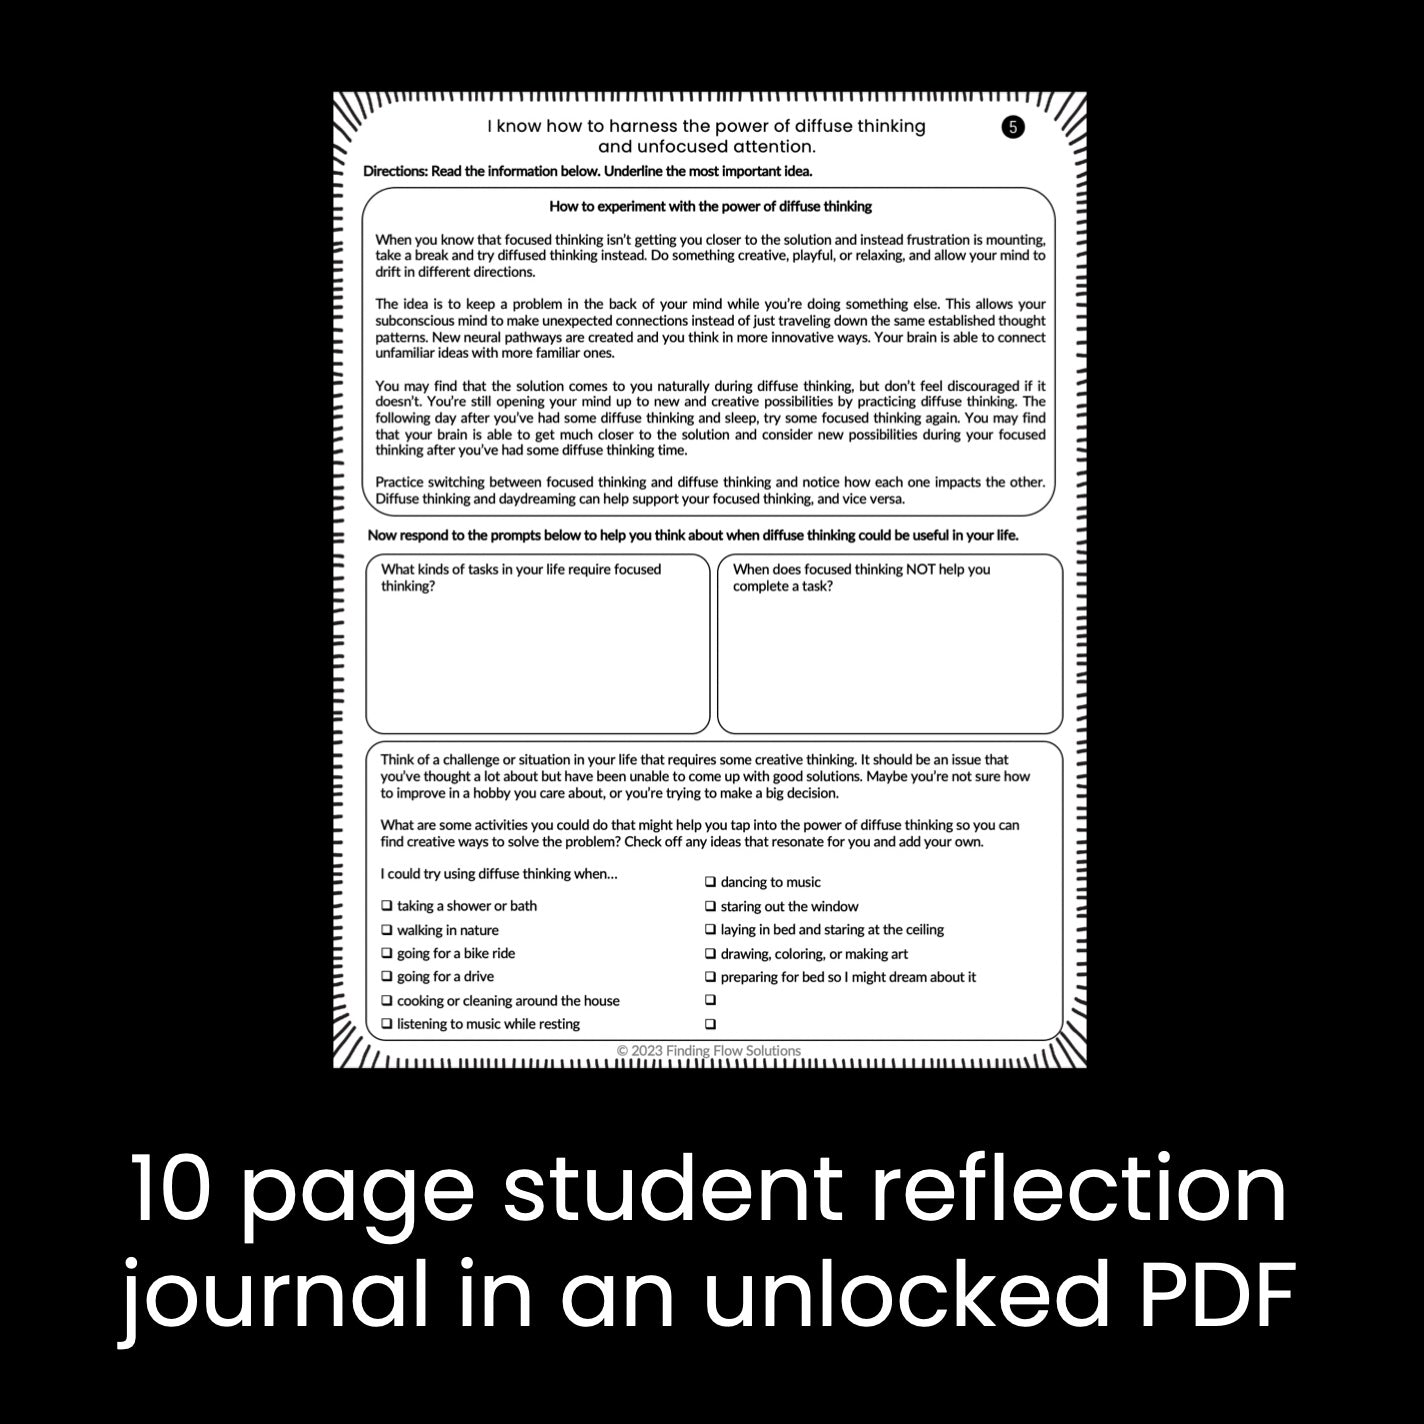 Focused Attention Unit: 10 lessons with PPT and student journals